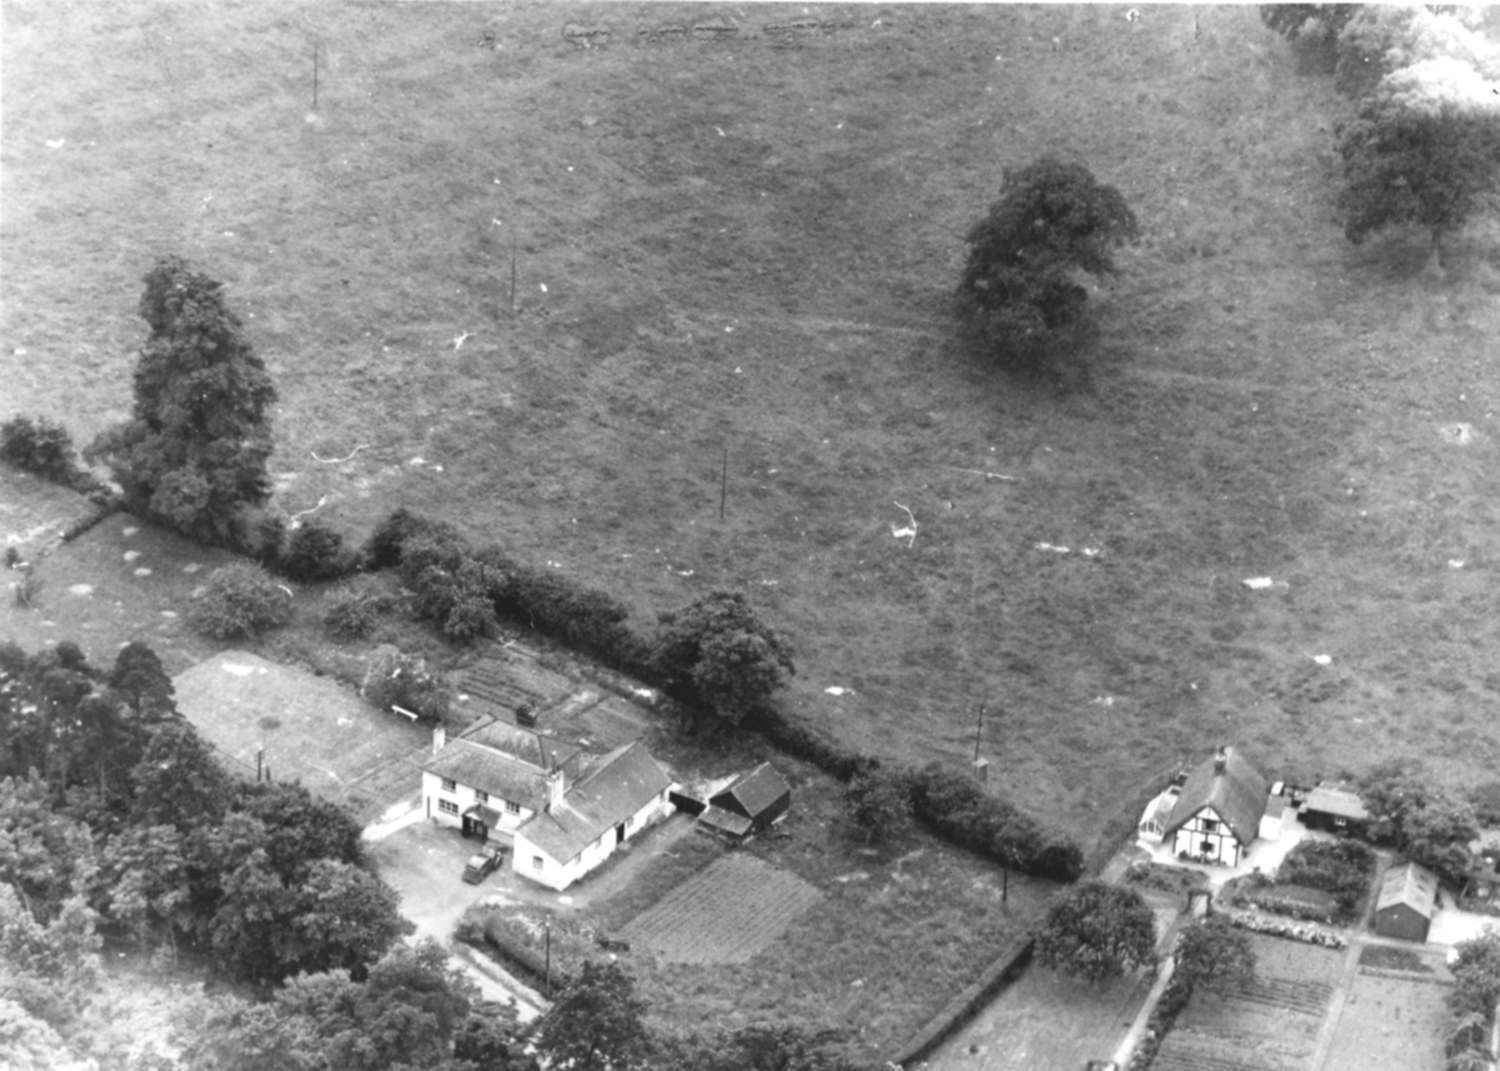 The 'Mole' P.H. and the 'Glen' from the air